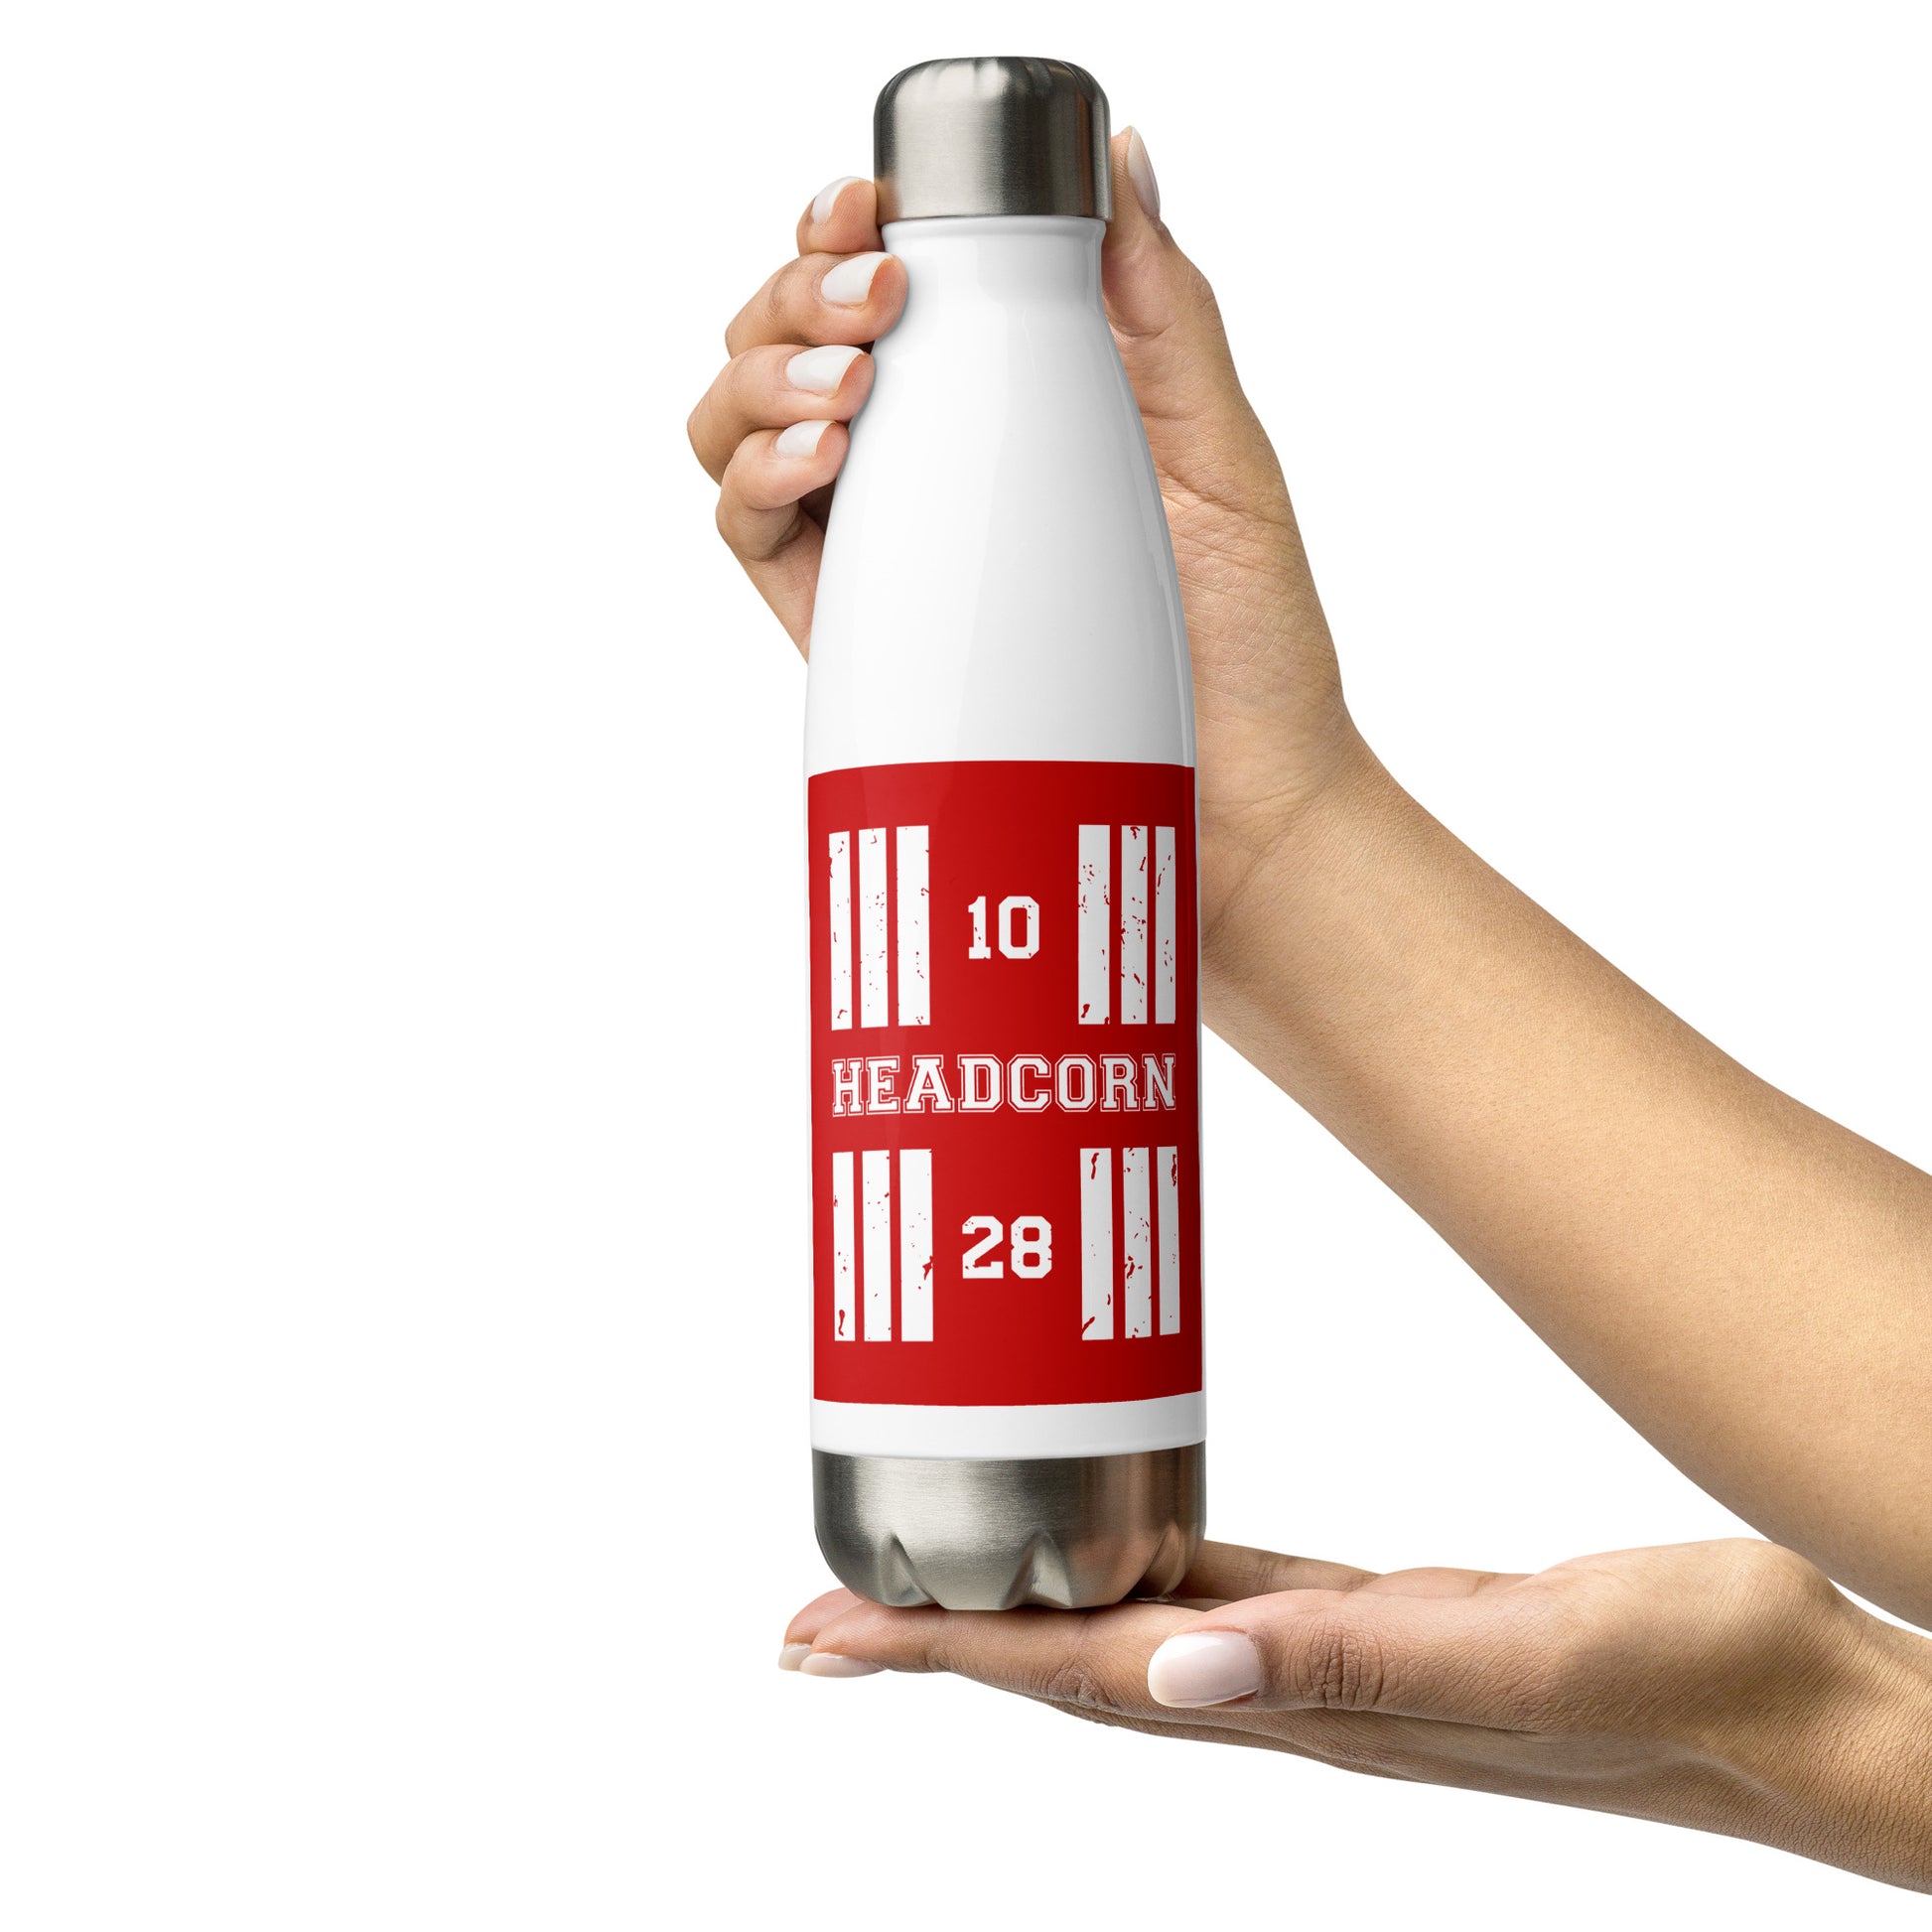 The Headcorn Aerodrome runway designator water bottle features a red print with the airport's name and designator framed by stylised threshold markings showing through.